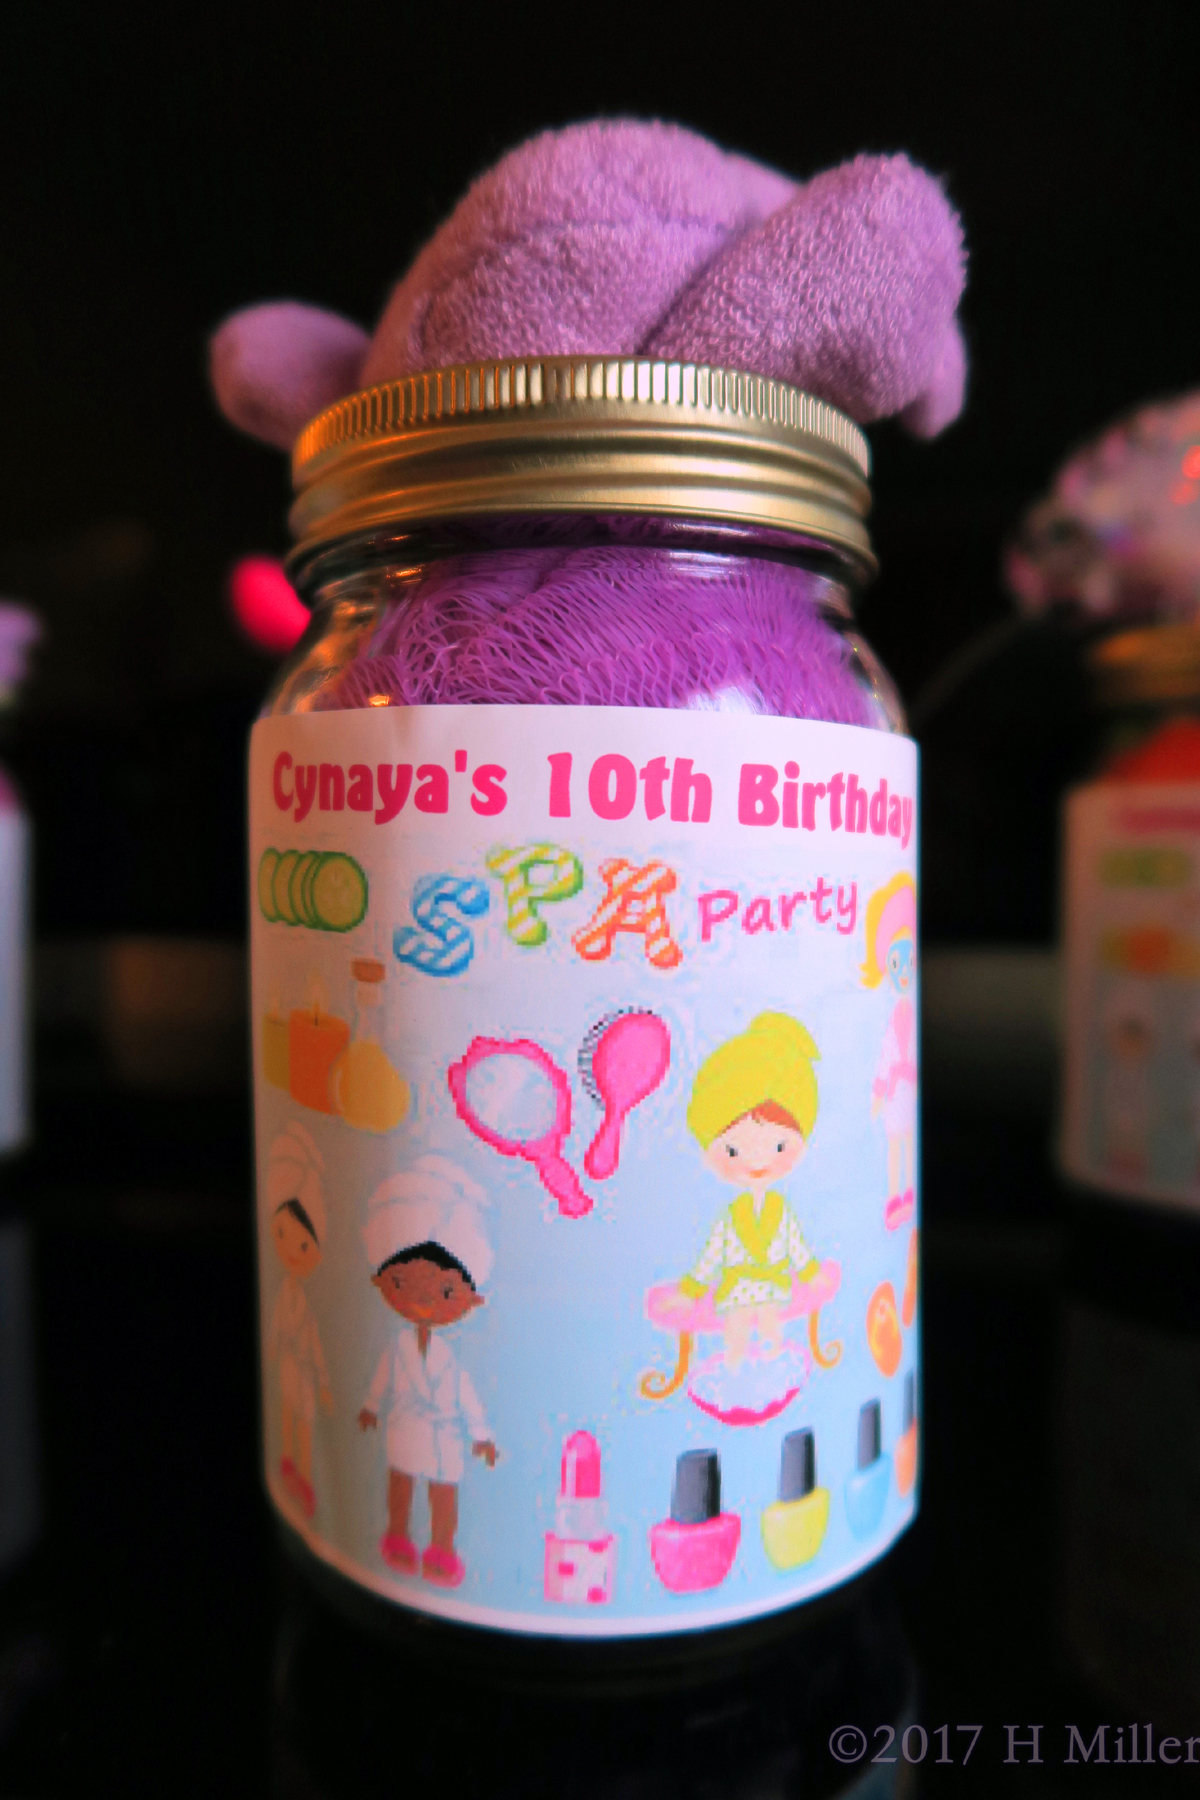 One Closer Look Of The Soft Toy Party Favor Jar For Cynaya's 10th Birthday! 